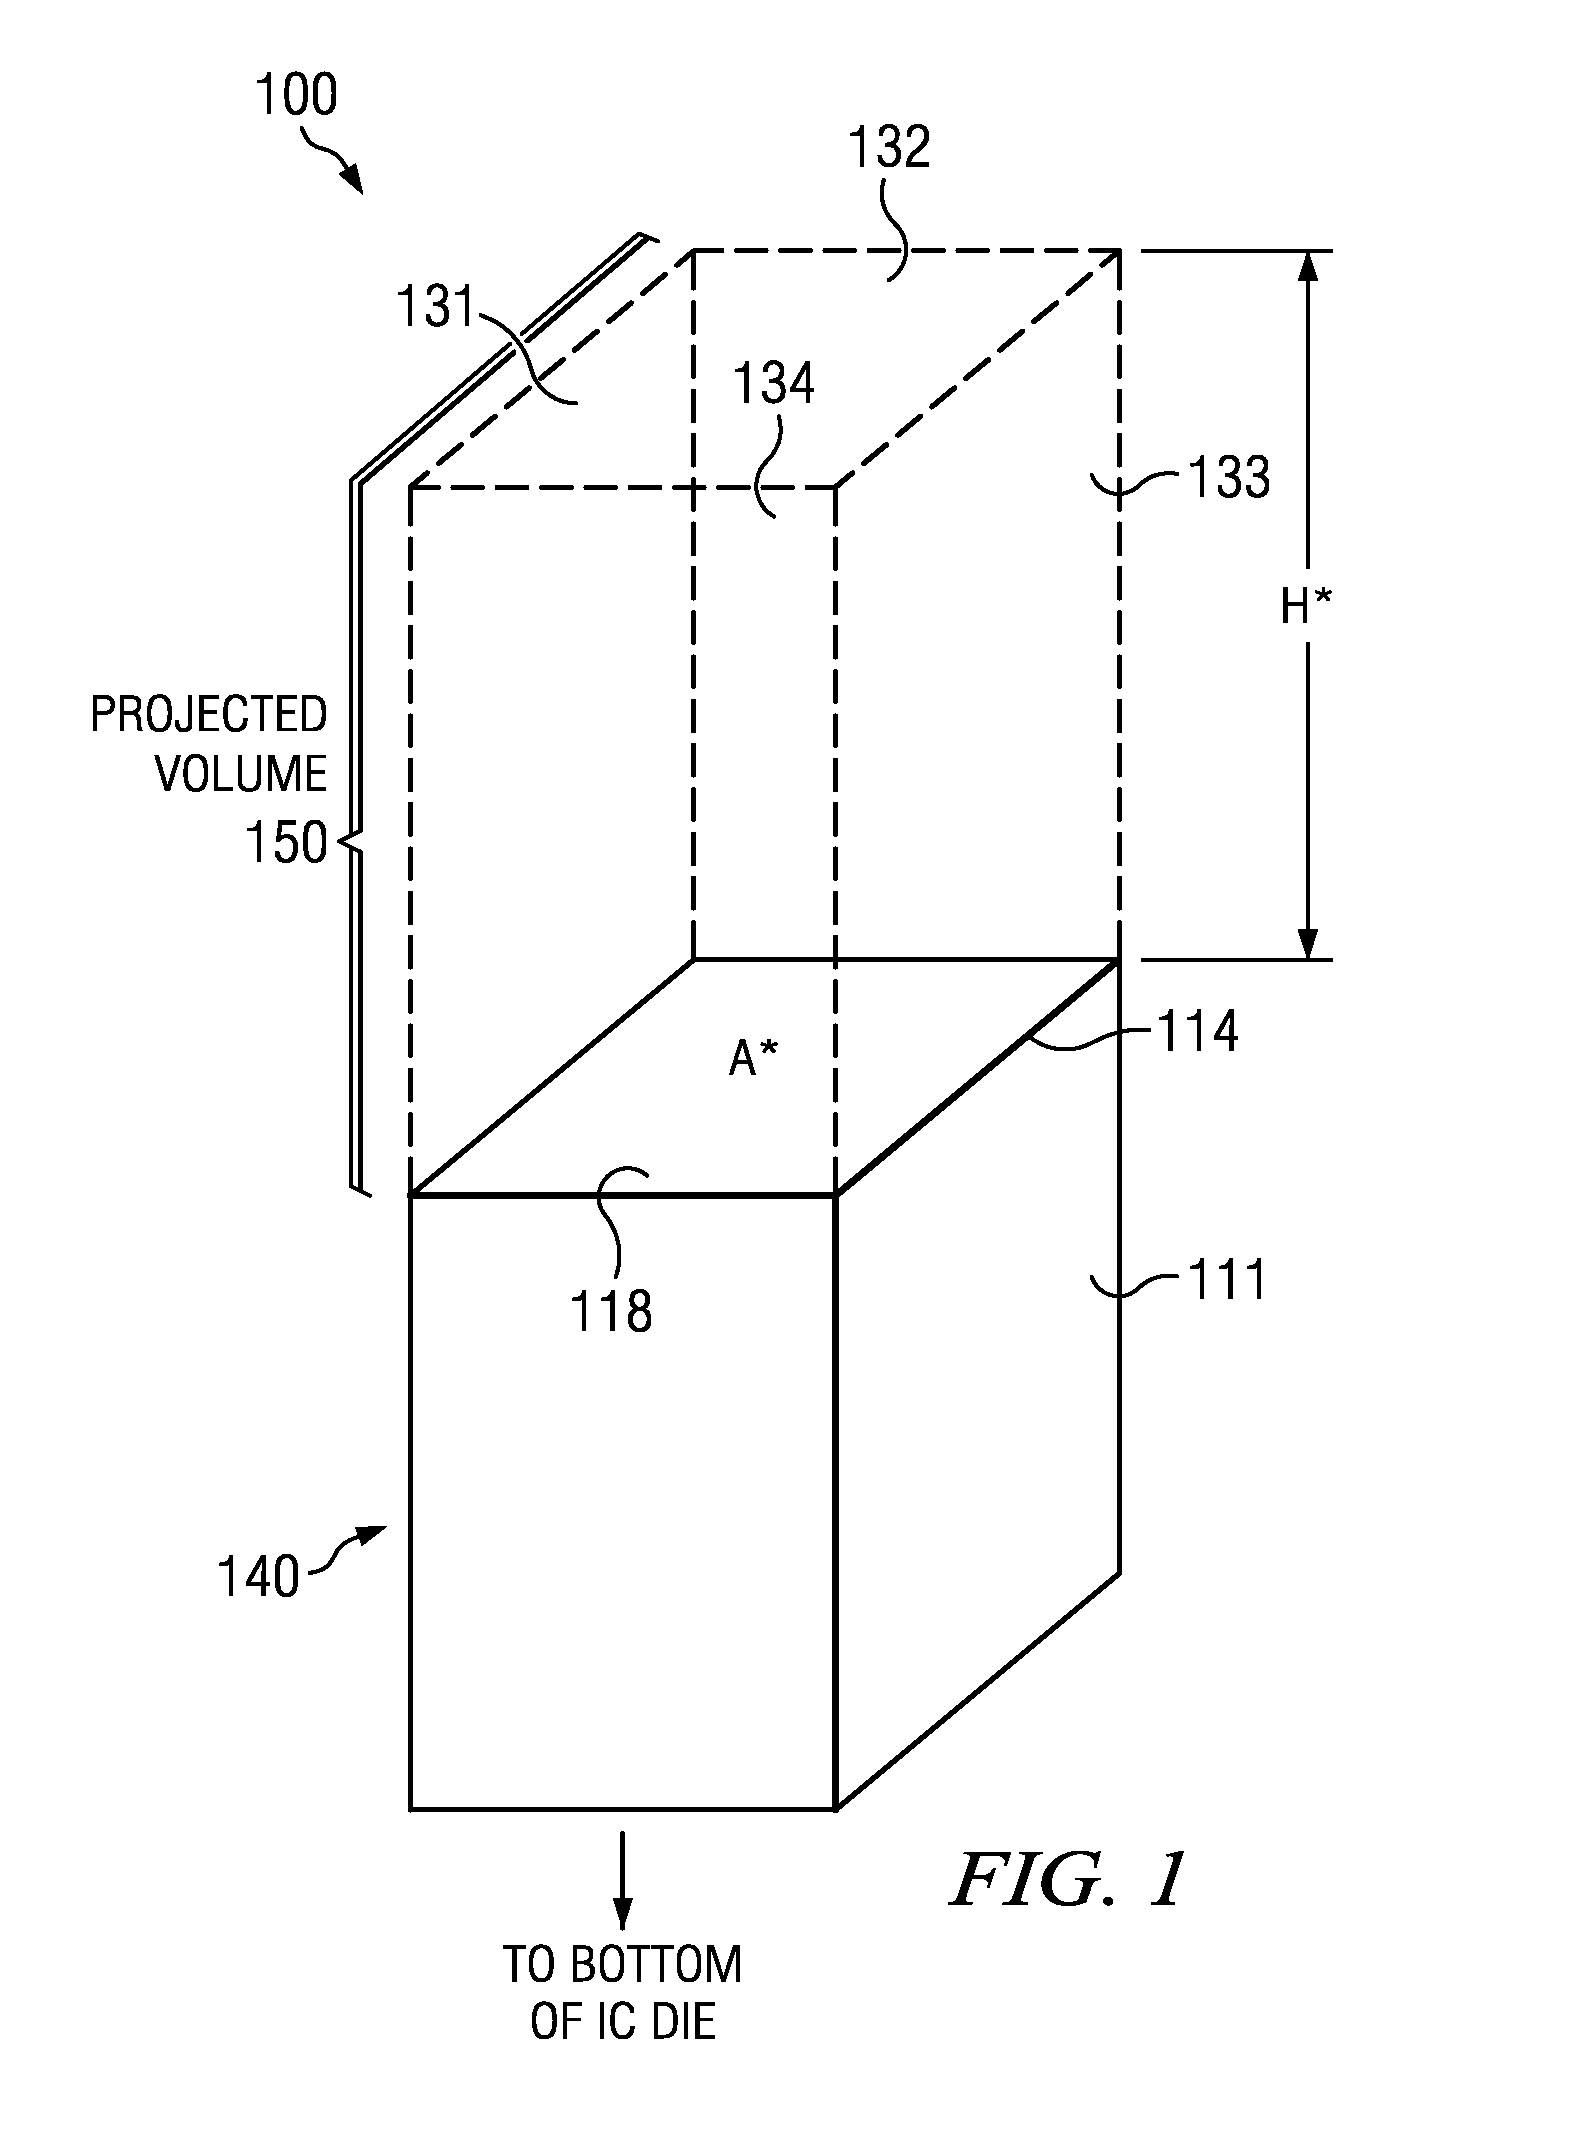 Integrated circuit (IC) having tsvs with dielectric crack suppression structures